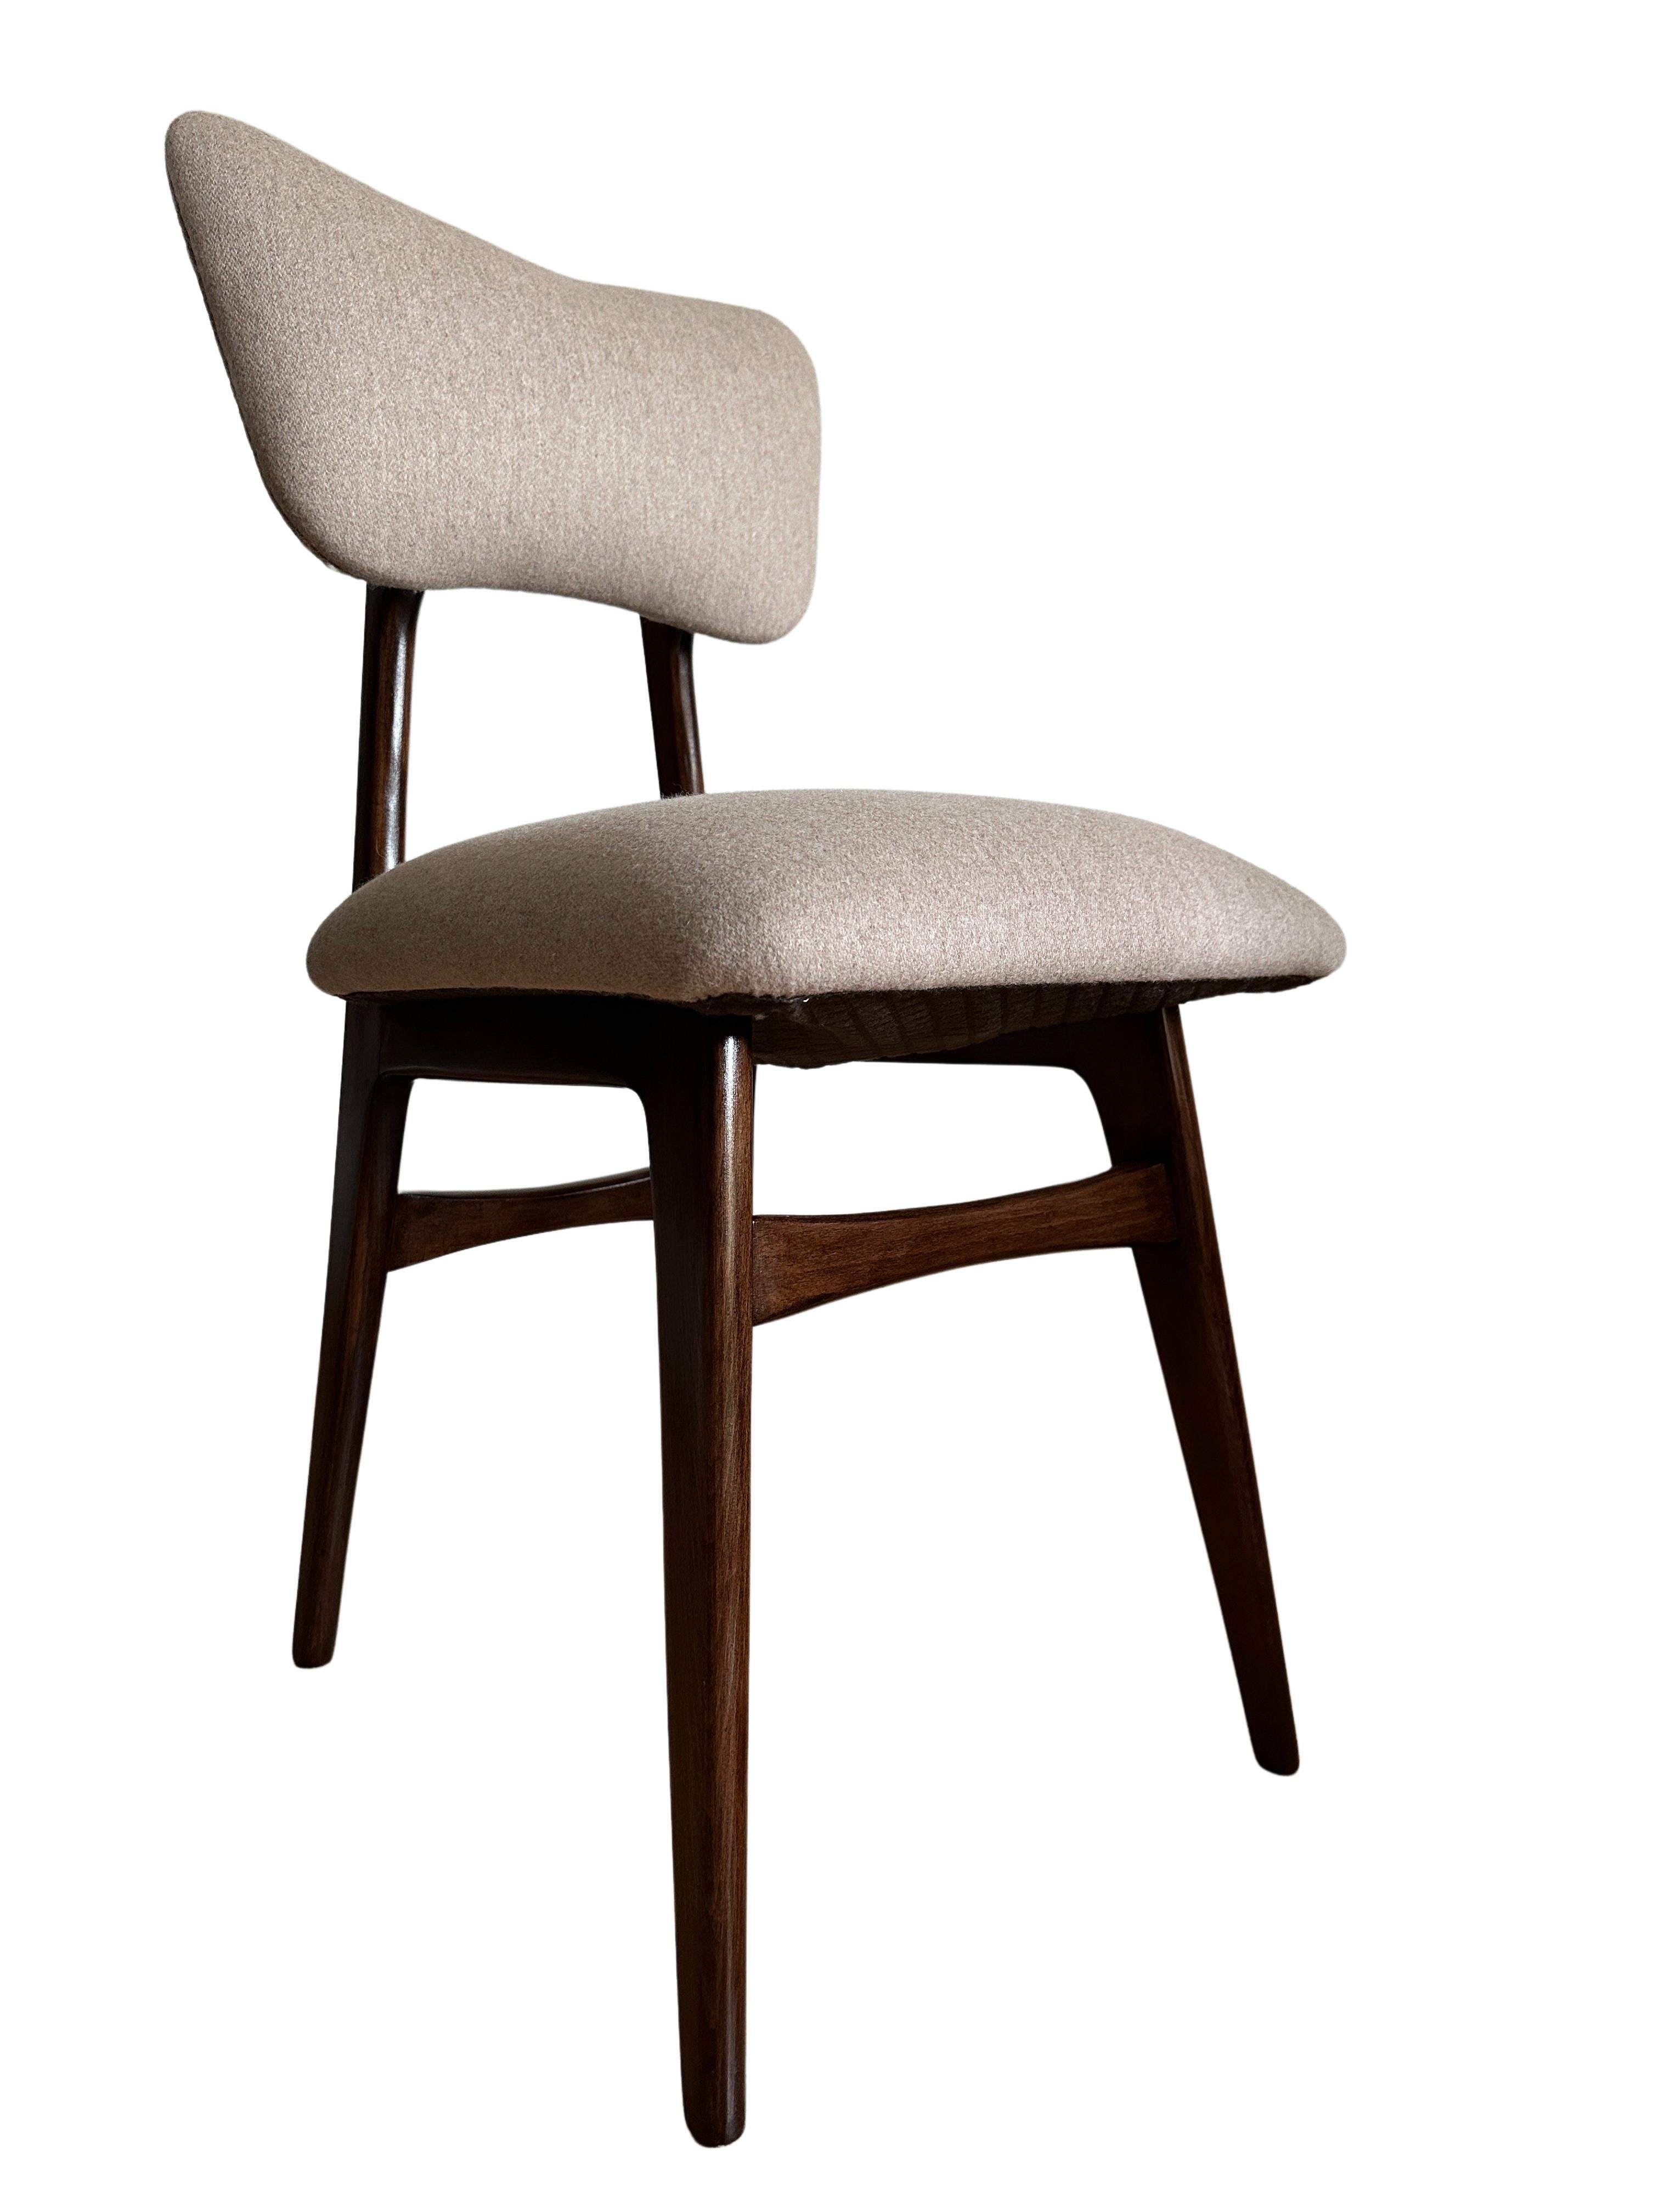 Midcentury Dining Chair in Beige Wool Upholstery, Poland, 1960s For Sale 7